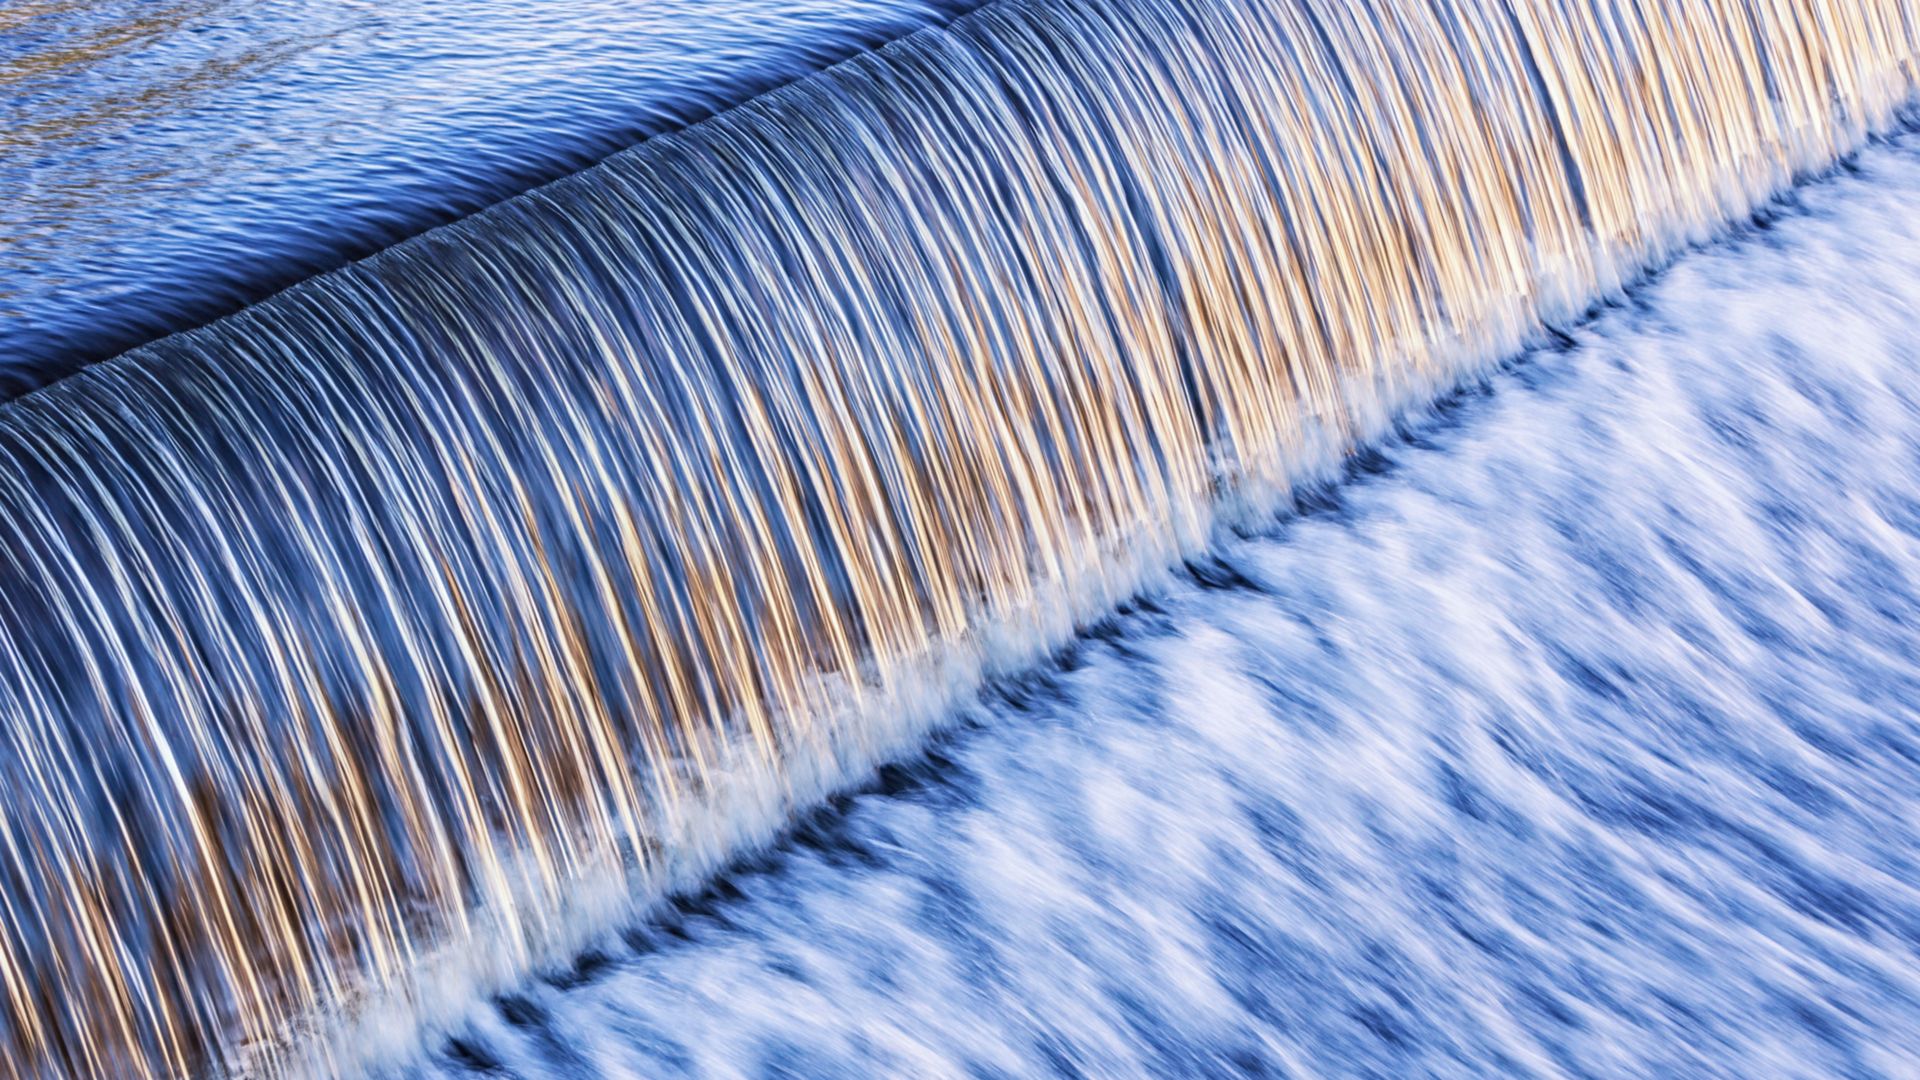 Rushing water flows over a man-made waterfall at the edge of an early evening Lake Placid, New York municipal river dam. Letterbox format composition.